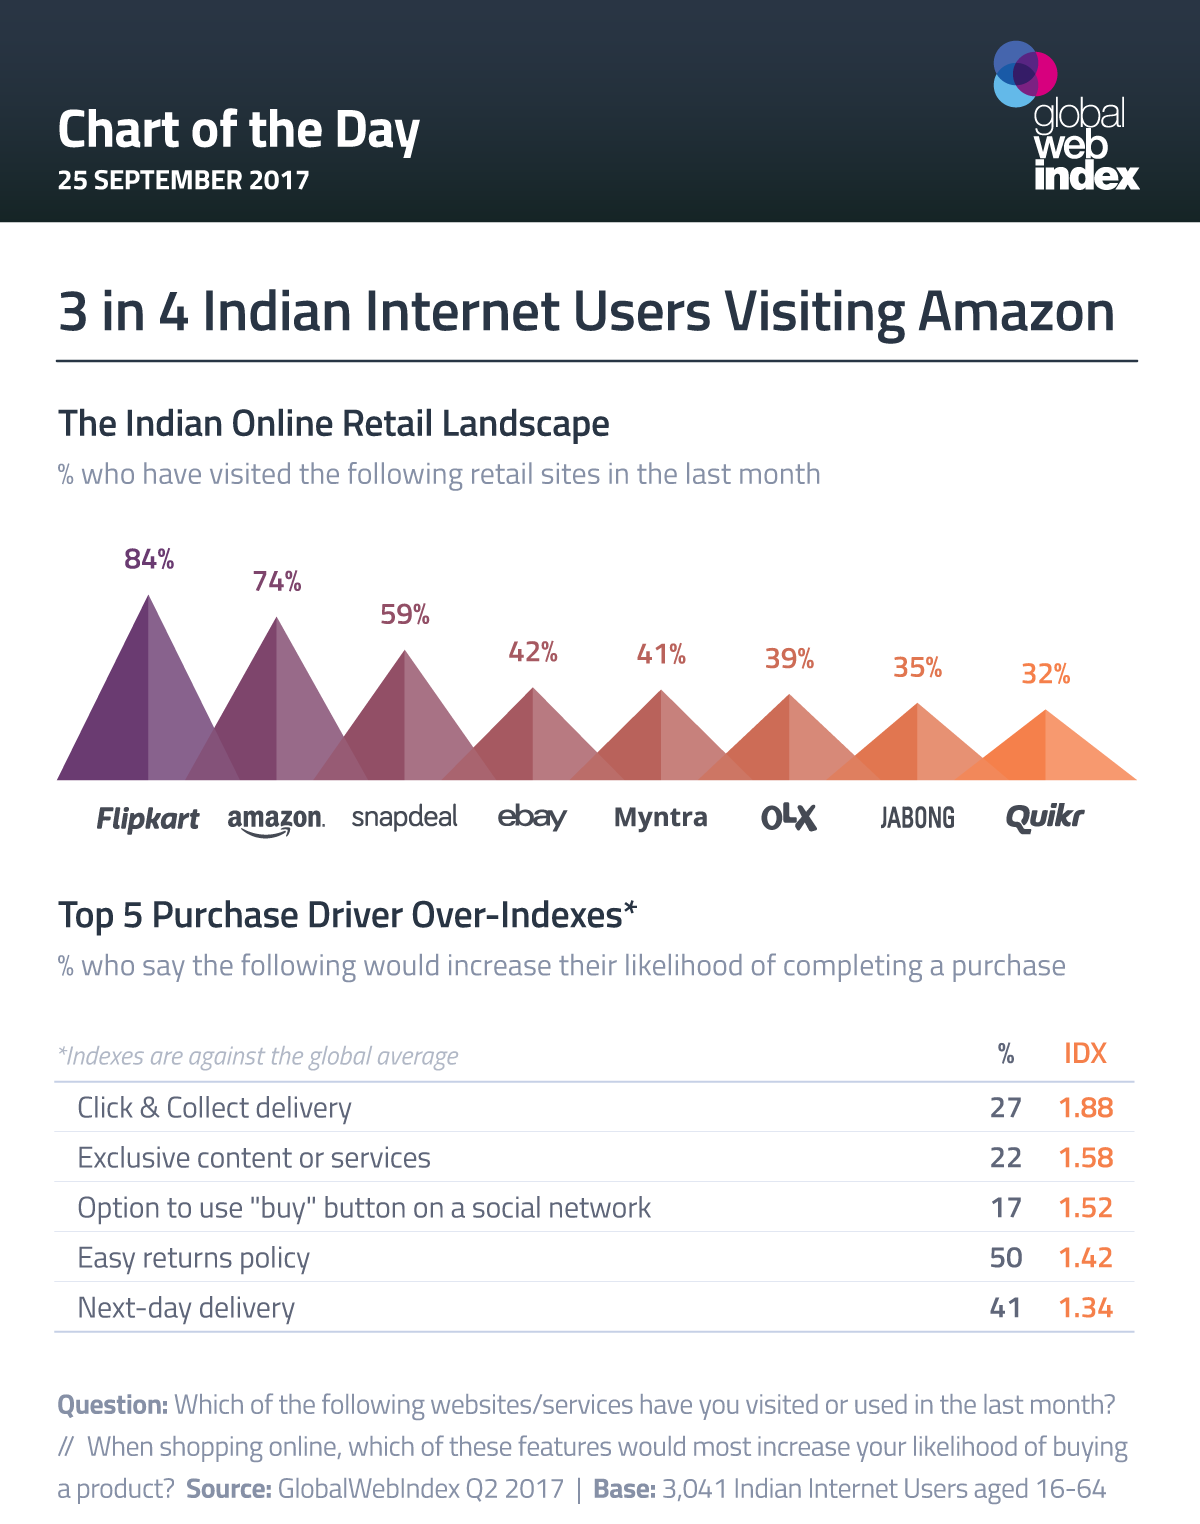 3 in 4 India Internet Users Visiting Amazon